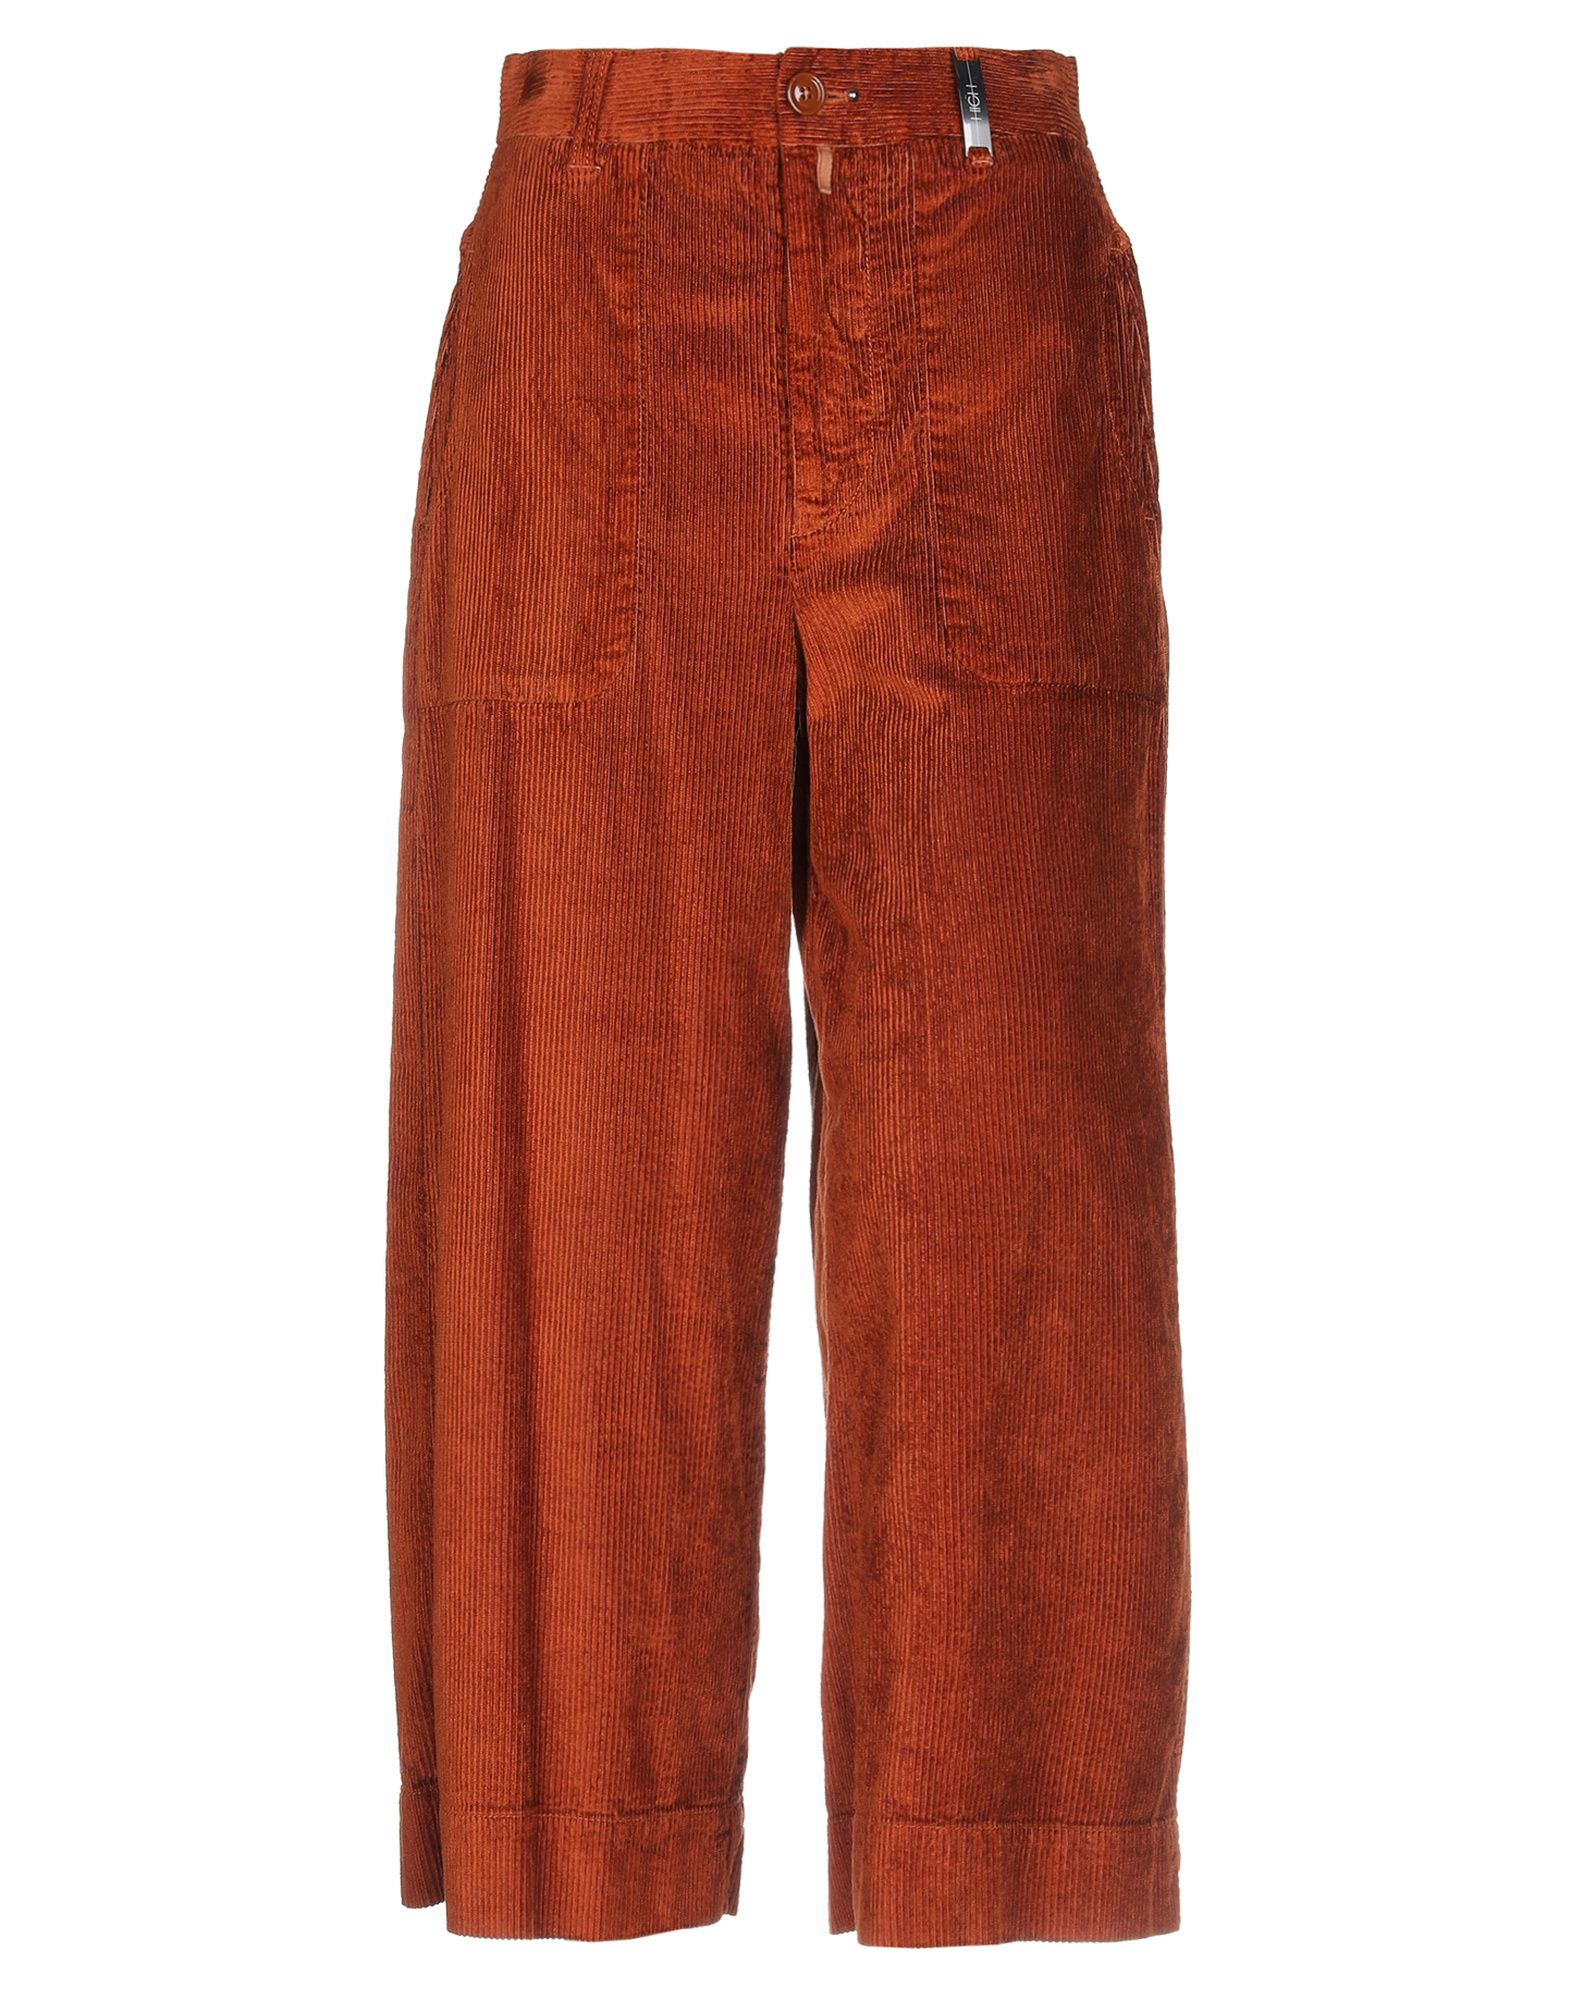 Shop High Woman Pants Rust Size 6 Rayon, Cotton, Elastane In Red